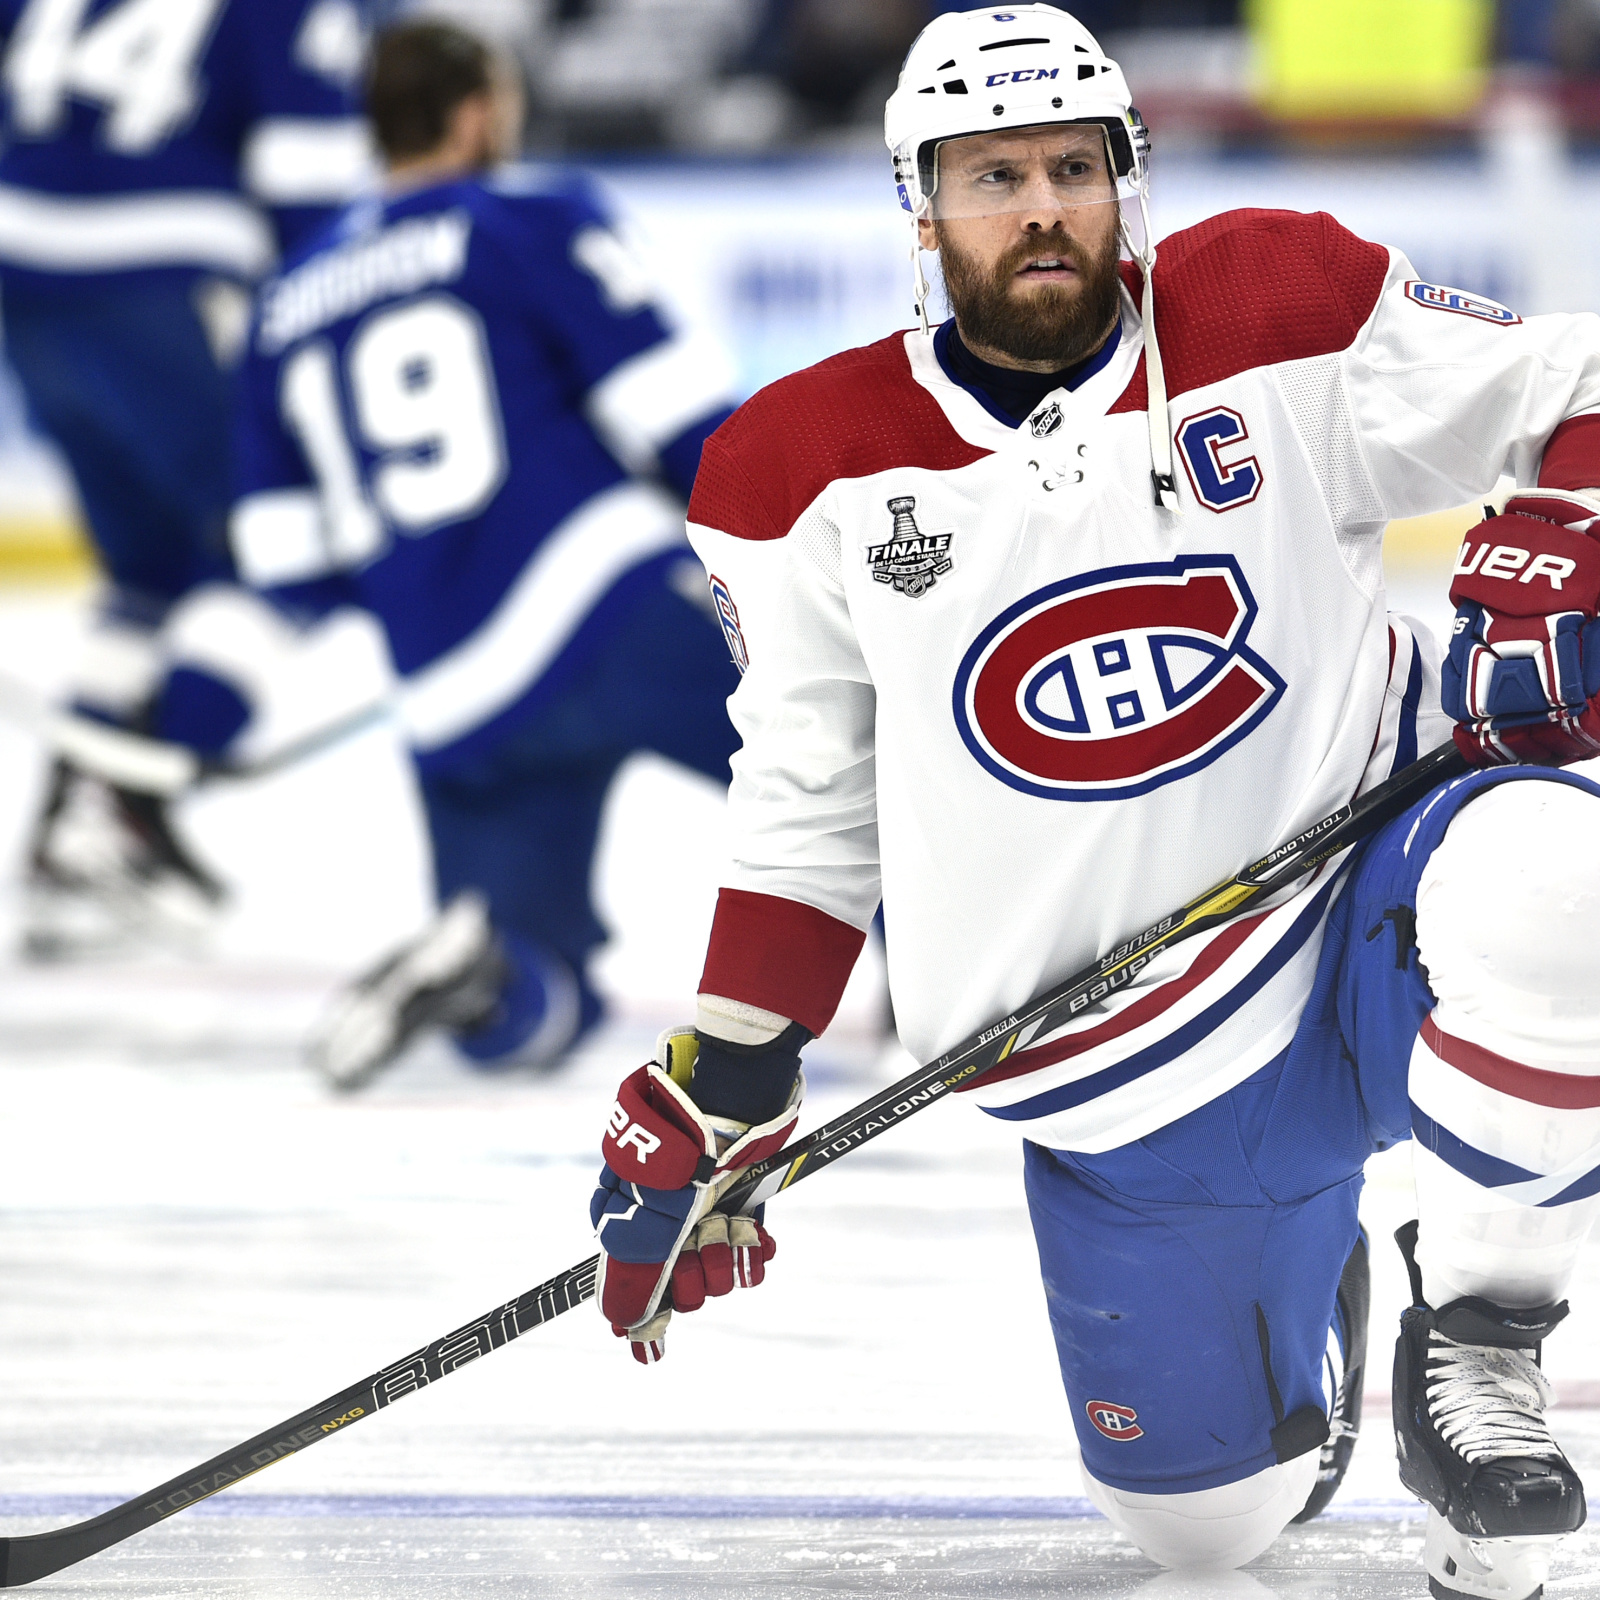 Former Canadiens captain Shea Weber has been traded again